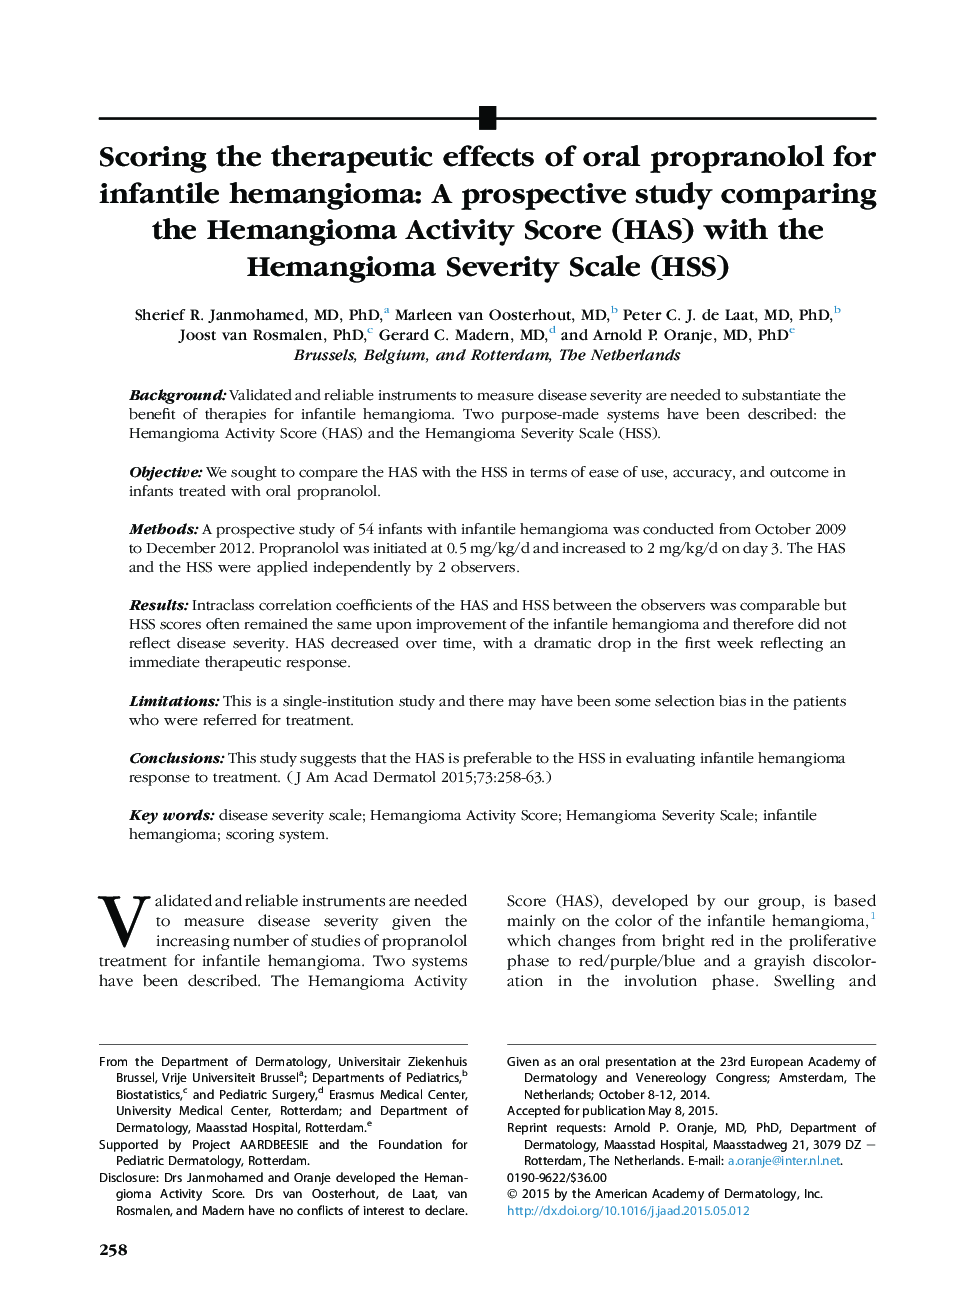 Original articleScoring the therapeutic effects of oral propranolol for infantile hemangioma: A prospective study comparing the Hemangioma Activity Score (HAS) with the Hemangioma Severity Scale (HSS)